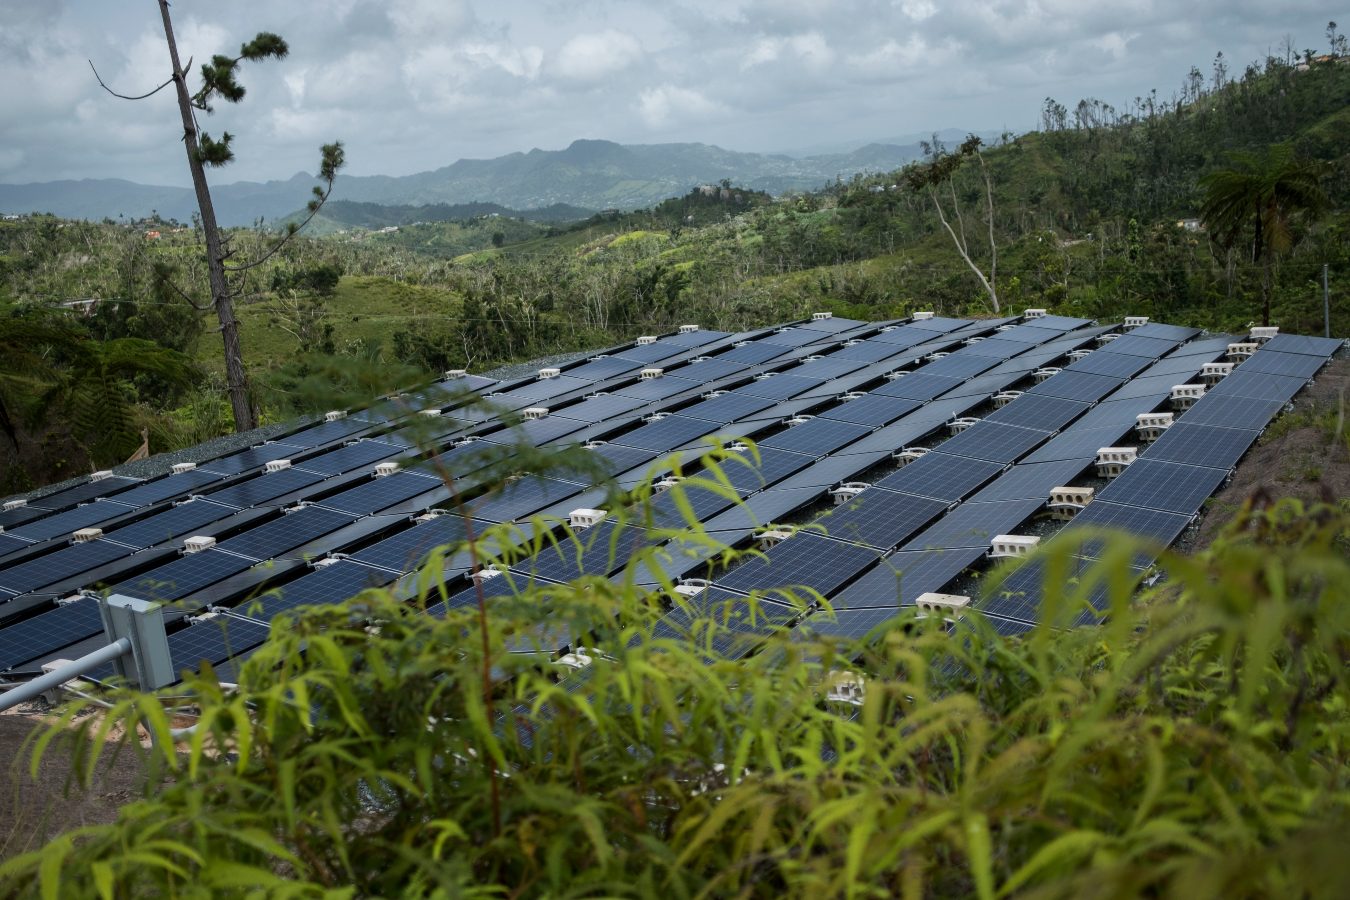 A solar farm sits in the middle of a lush, green, and mountainous landscape in Puerto Rico.